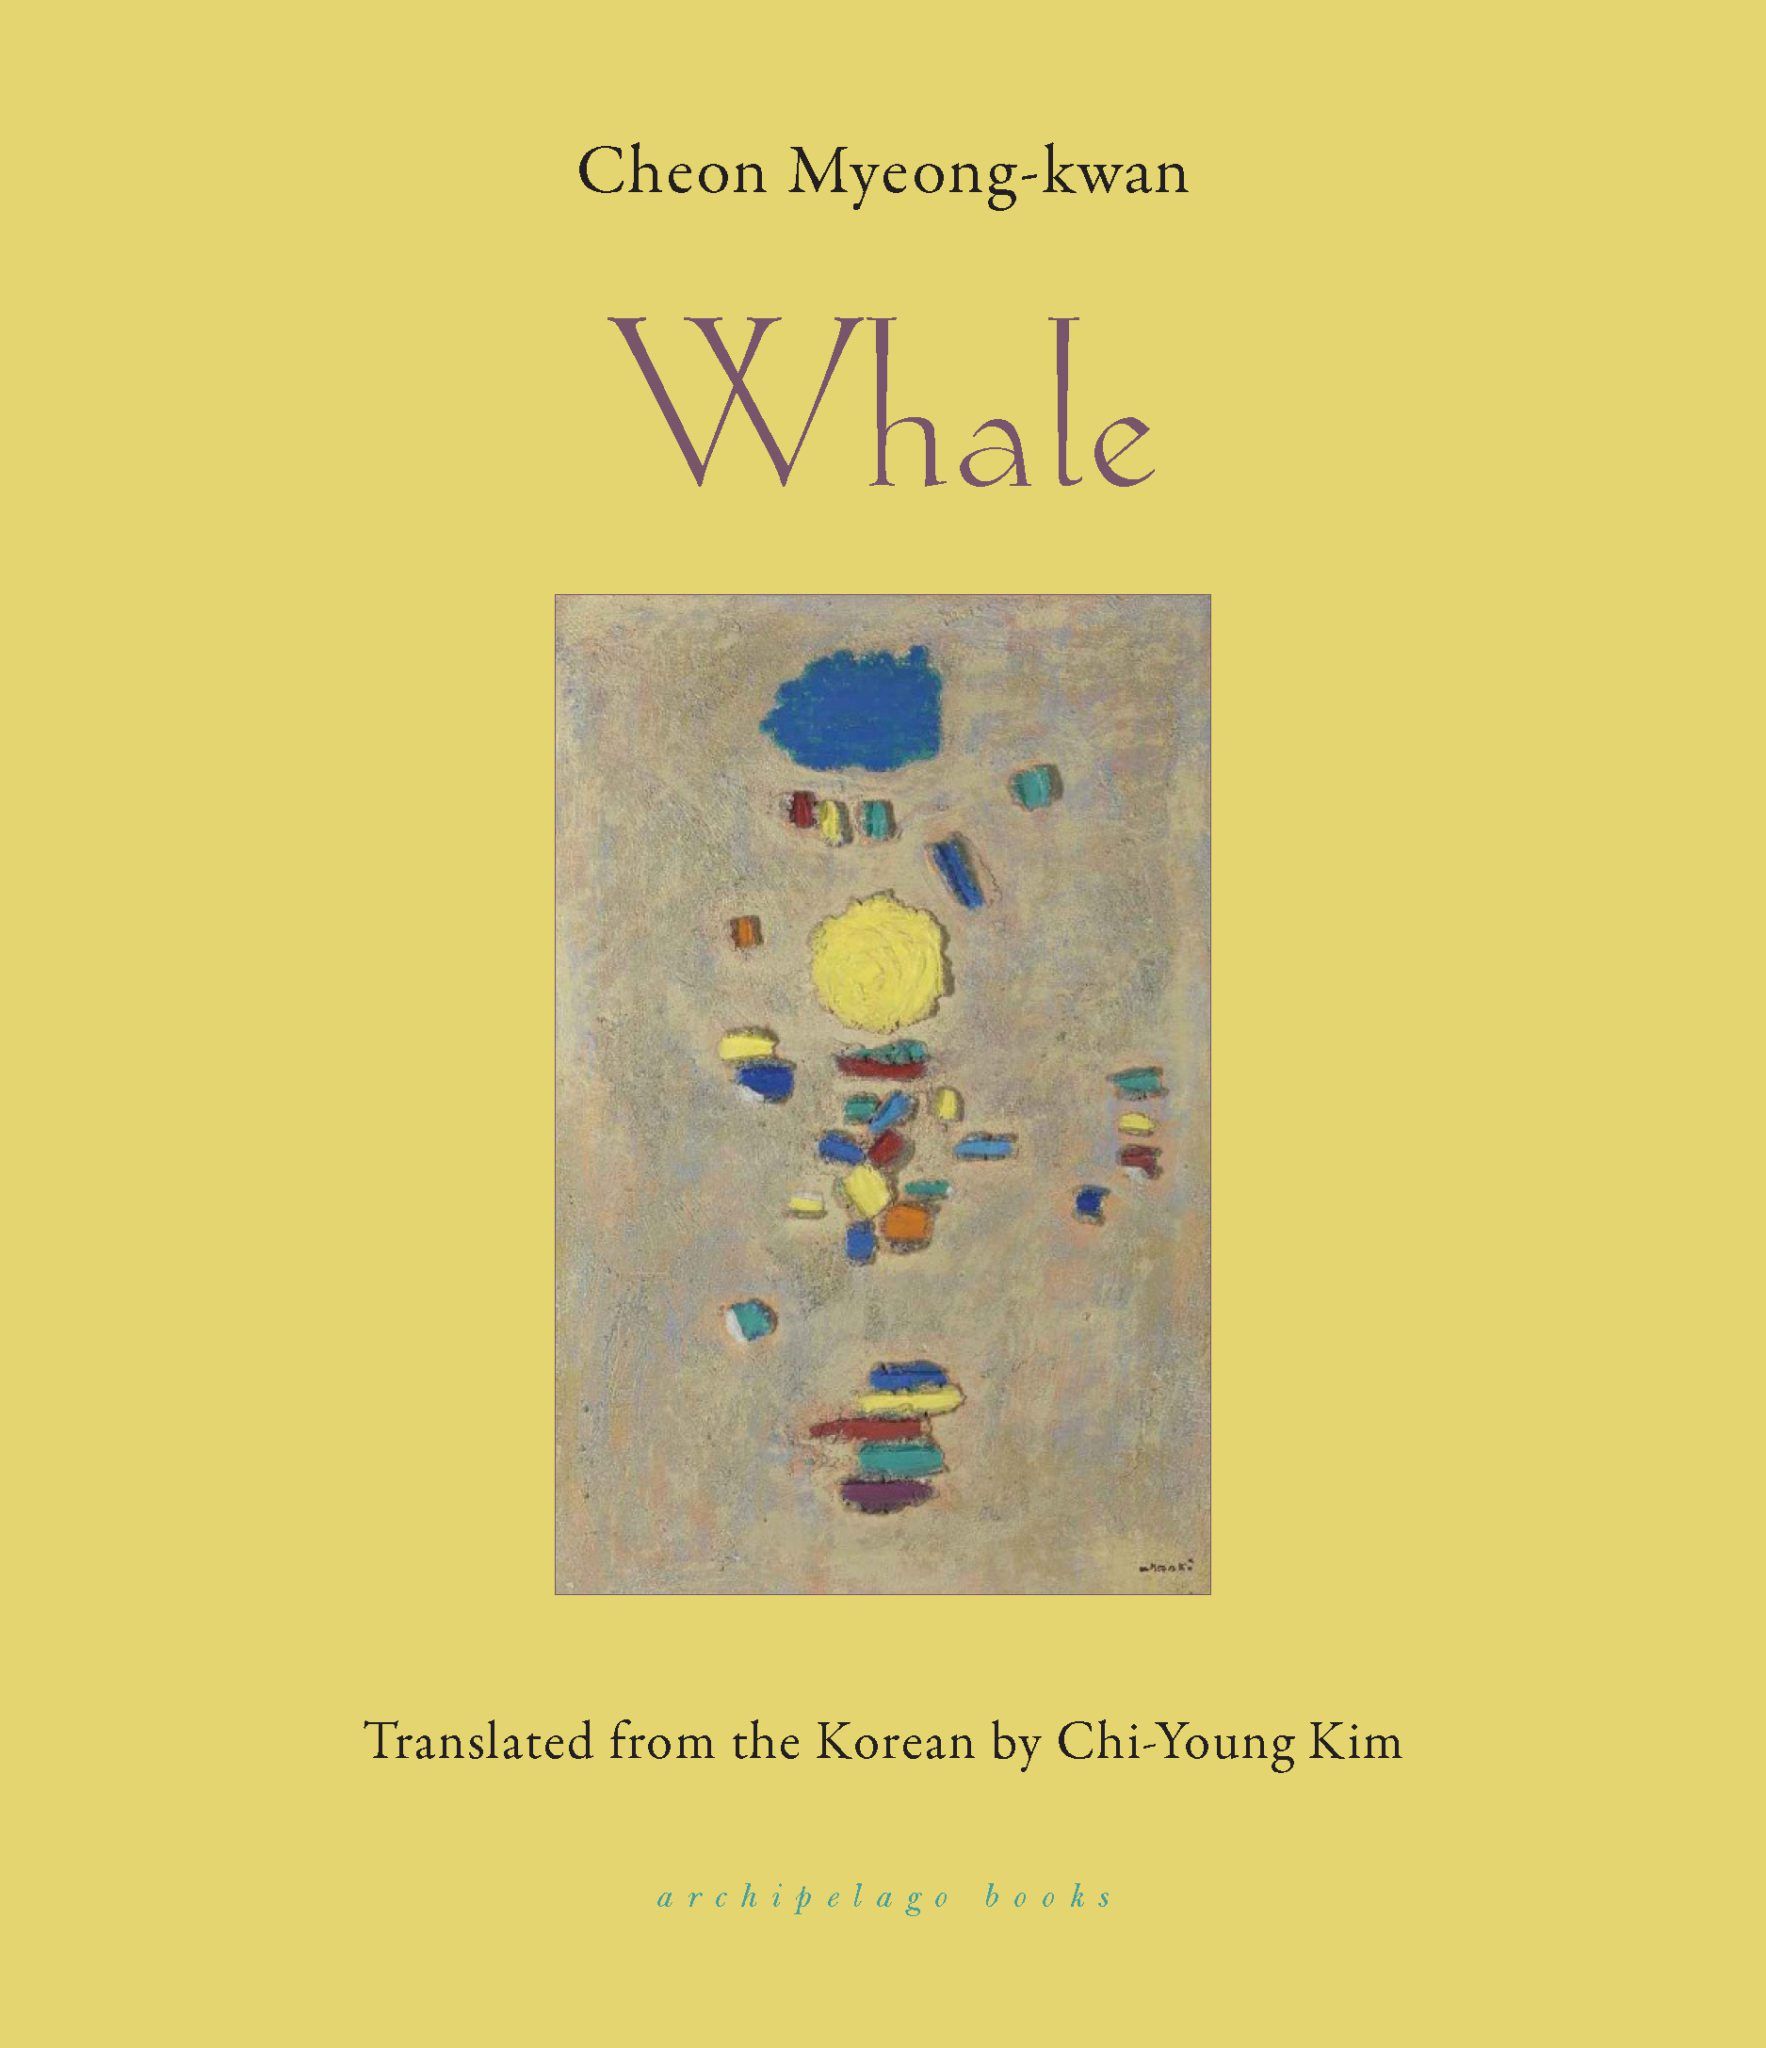 Cover of Whale by Cheon Myeong-kwan